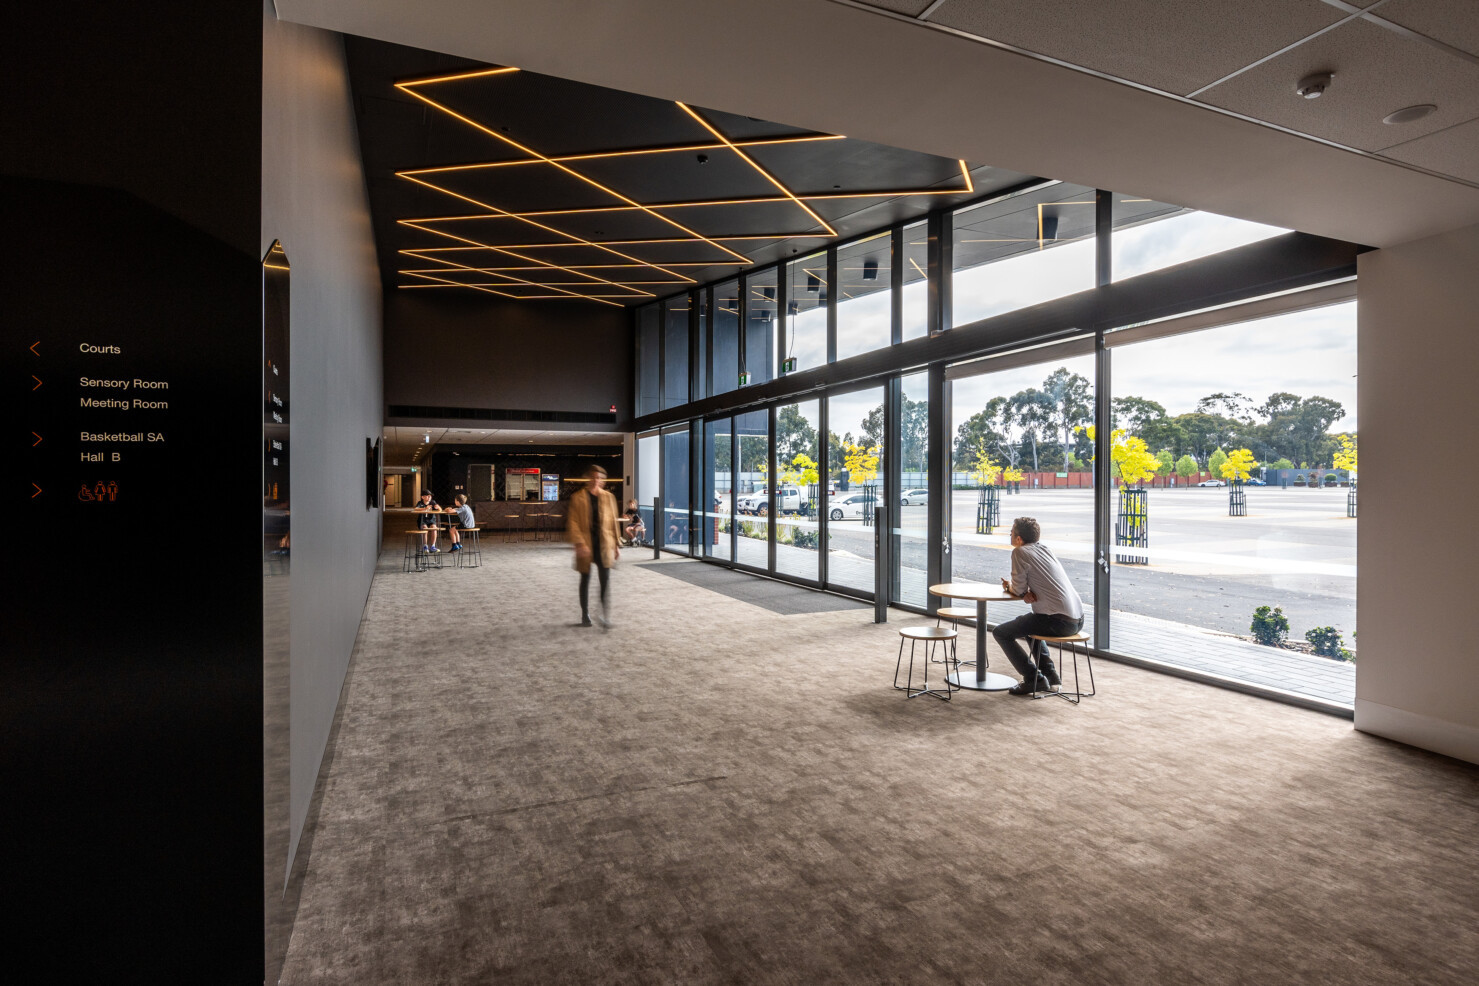 The entry and spectator foyer features a criss cross of LED strip lighting that replicates a basketball net. People wait in the foyer, walking the space and sitting on cafe tables.